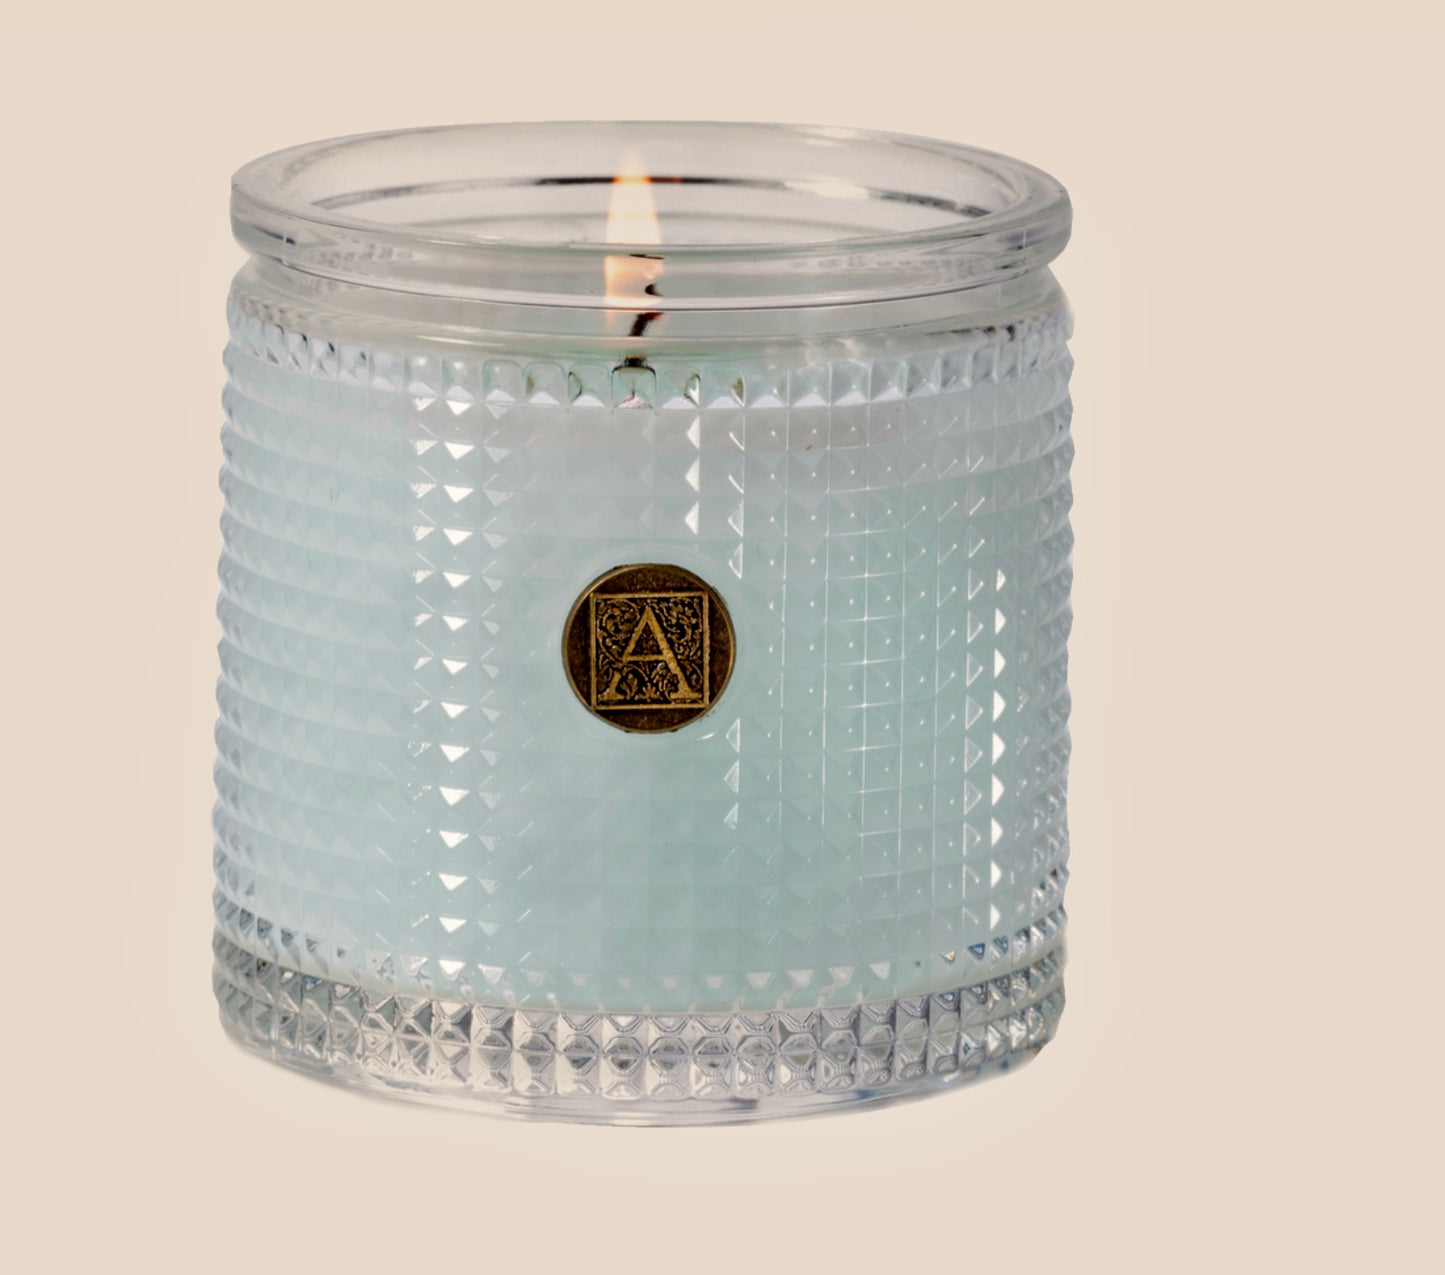 Aromatique Cotton Ginseng textured glass candle